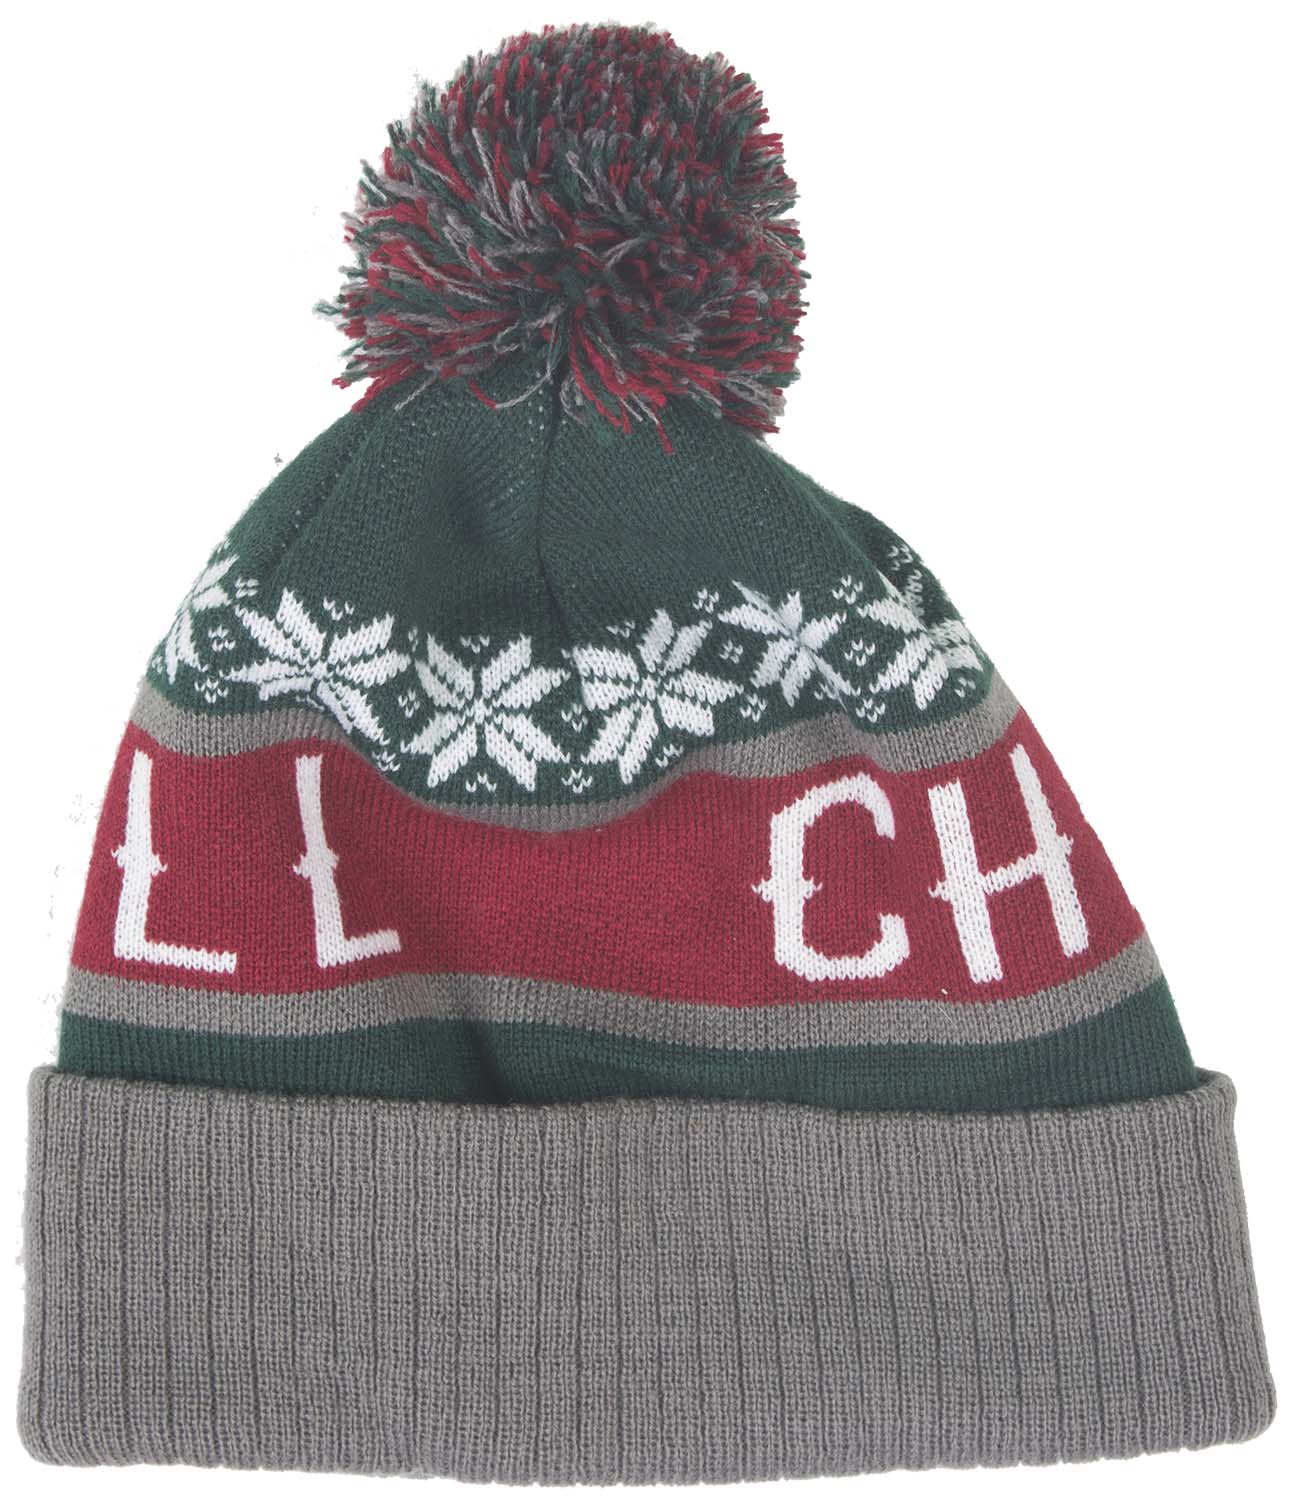 CHILL green and red knit cuff beanie with pom